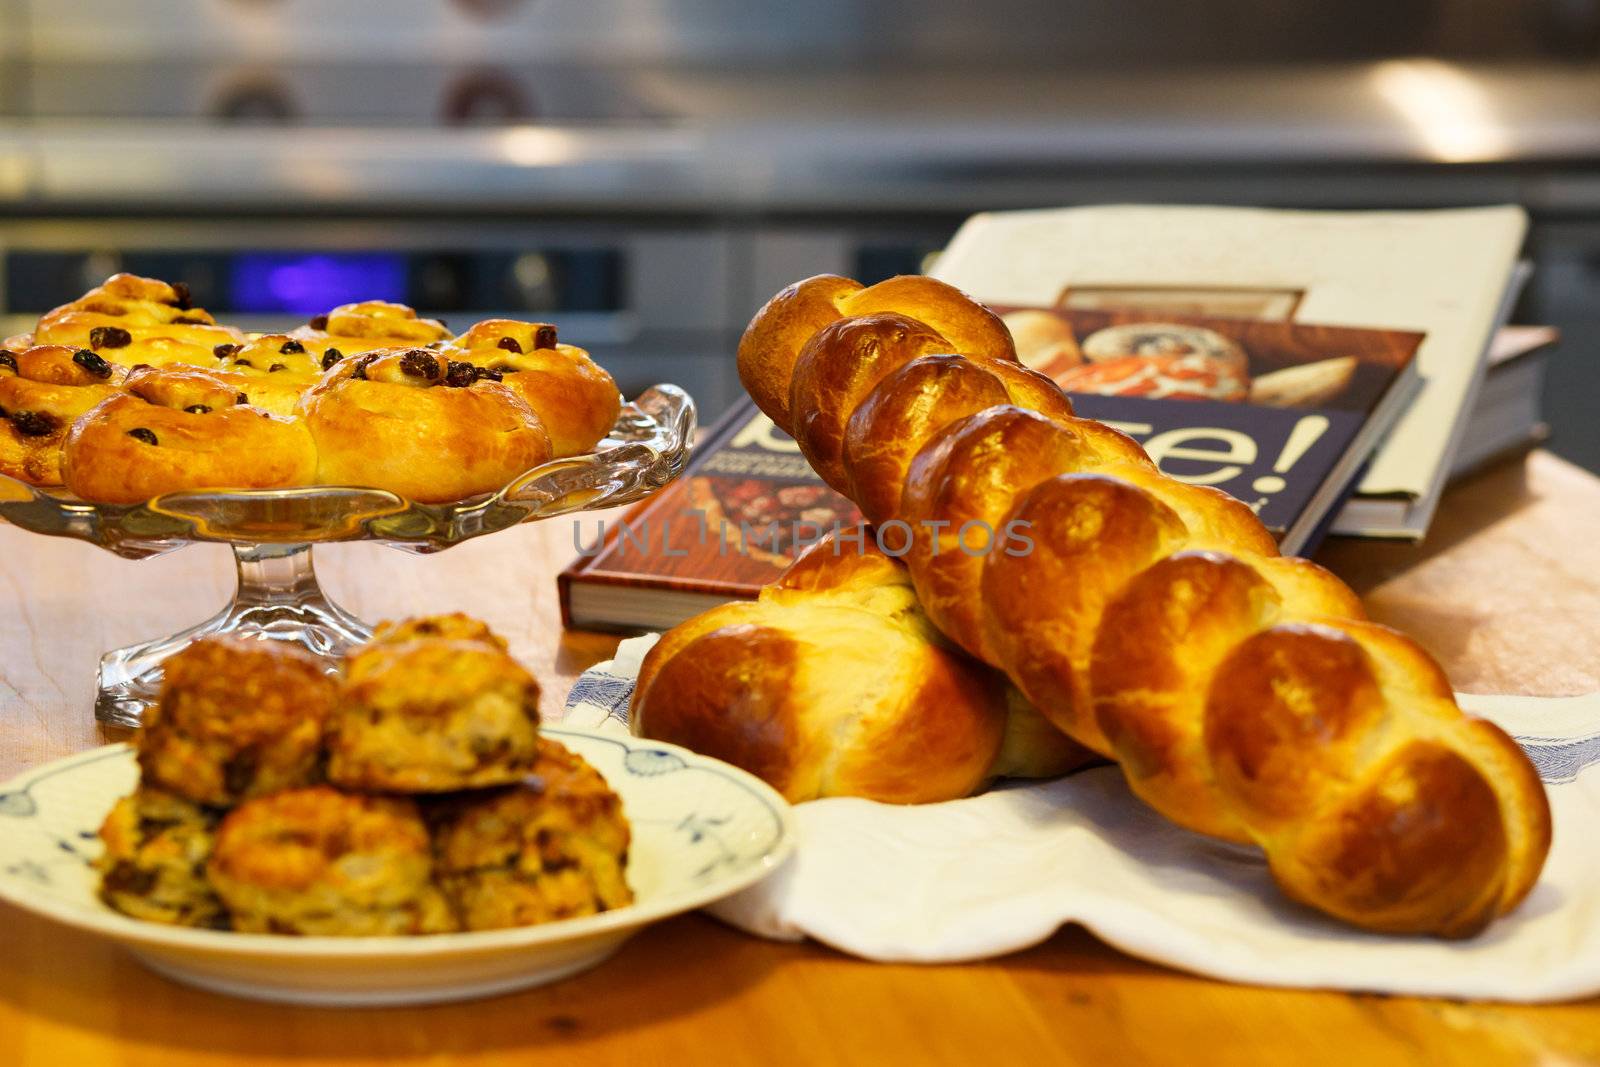 Mouth watering assortment of bakery items neatly arranged along with recipe books.